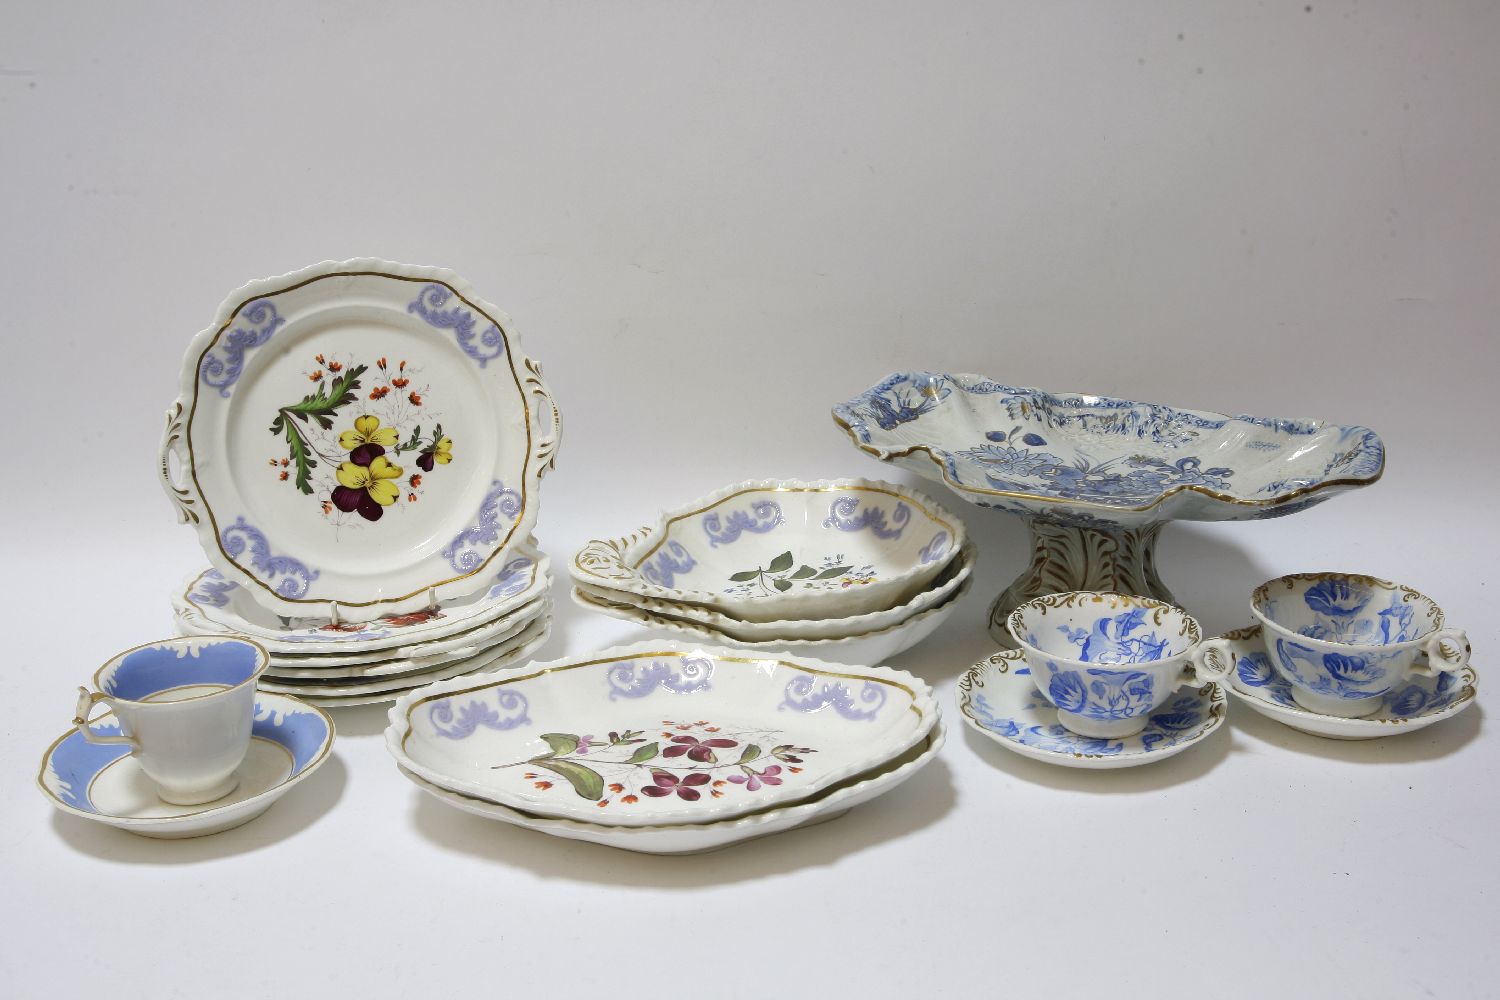 A collection of blue and white printed plates